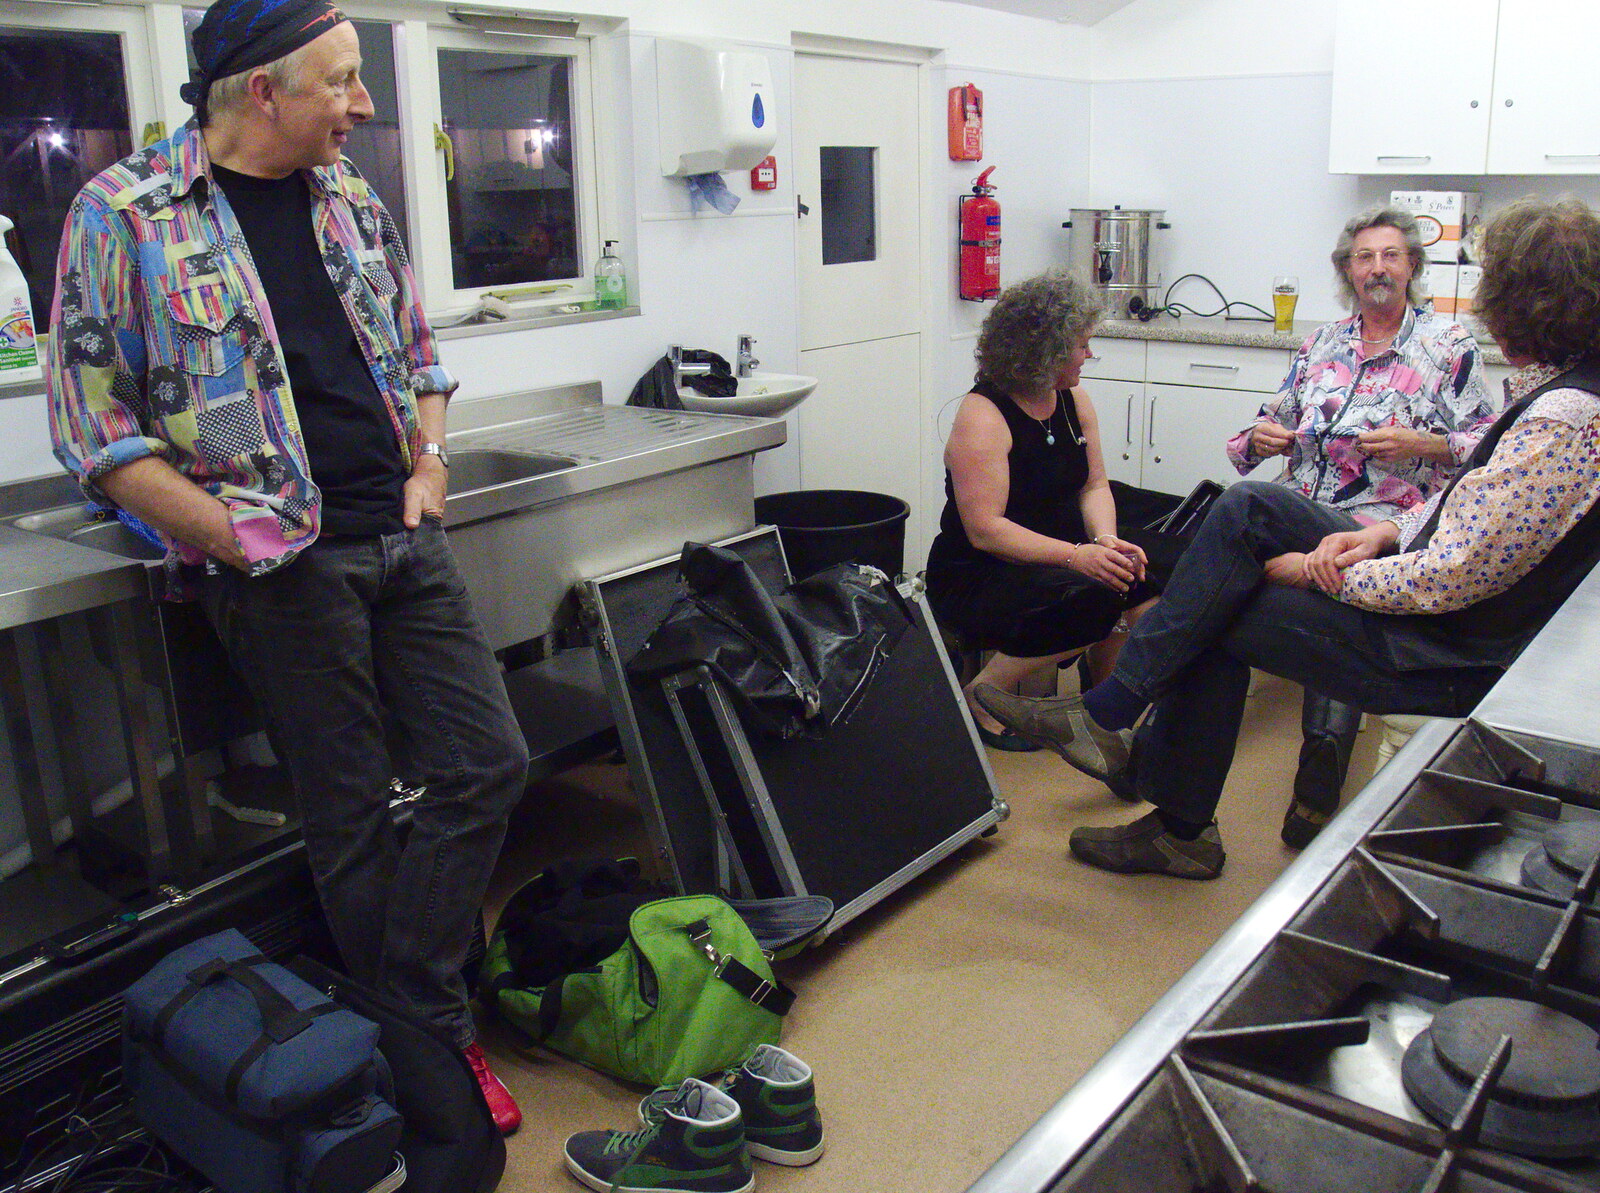 The band hangs out in the kitchen from The BBs Play Haughley Park Barn, Haughley, Suffolk - 26th April 2014